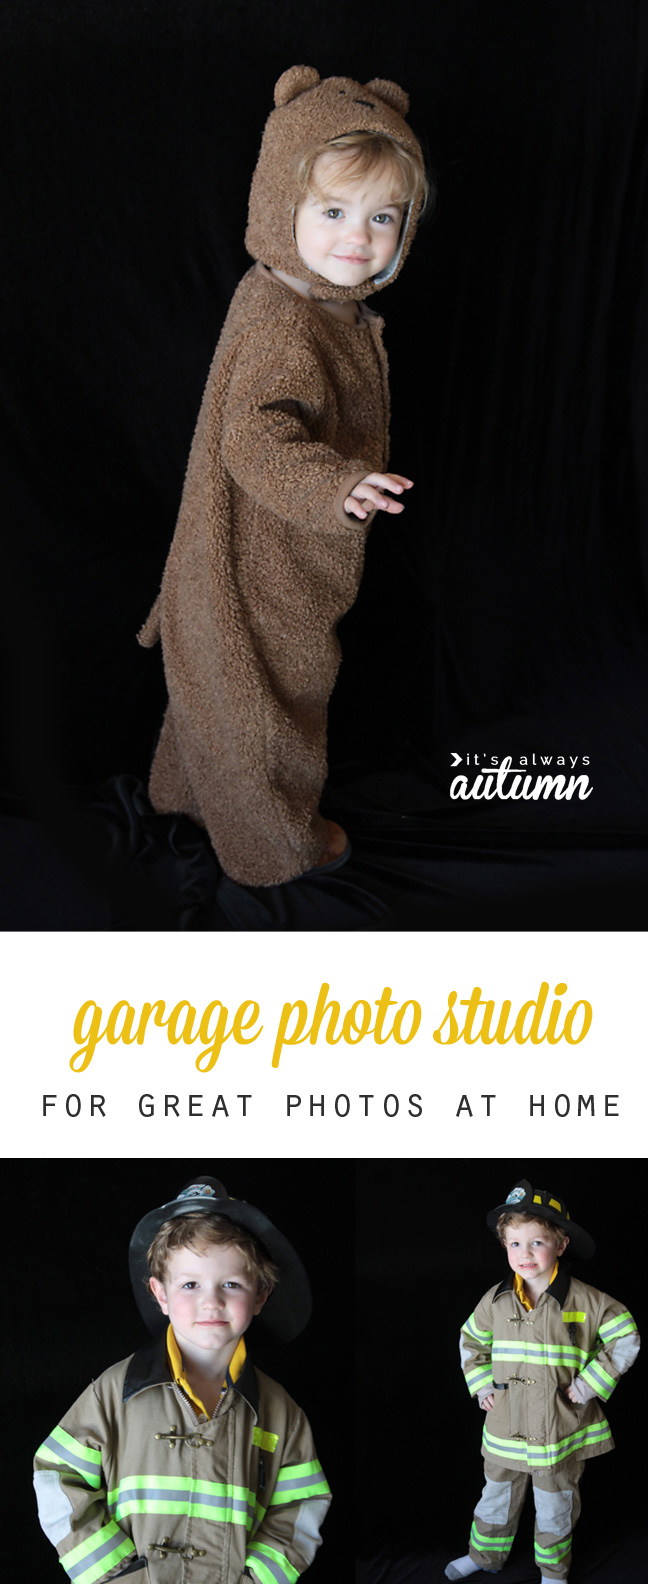 A girl in a bear costume in front of a black background and a boy in a firefighter costume in front of a black background; garage photo studio for great photos at home